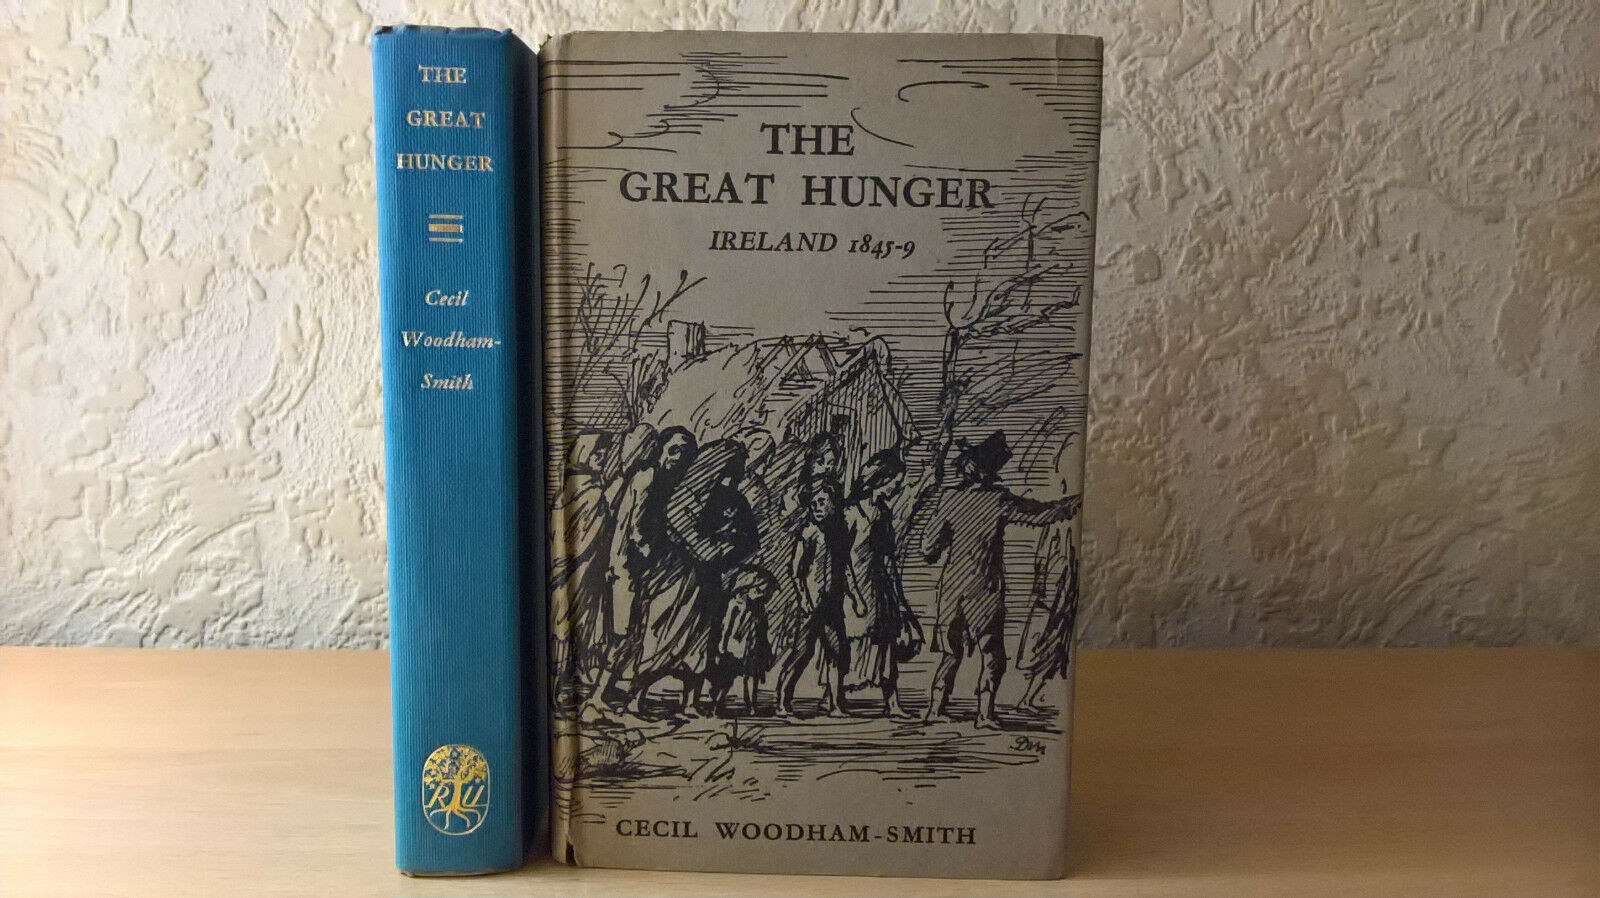 The Great Hunger by Cecil Woodham-Smith